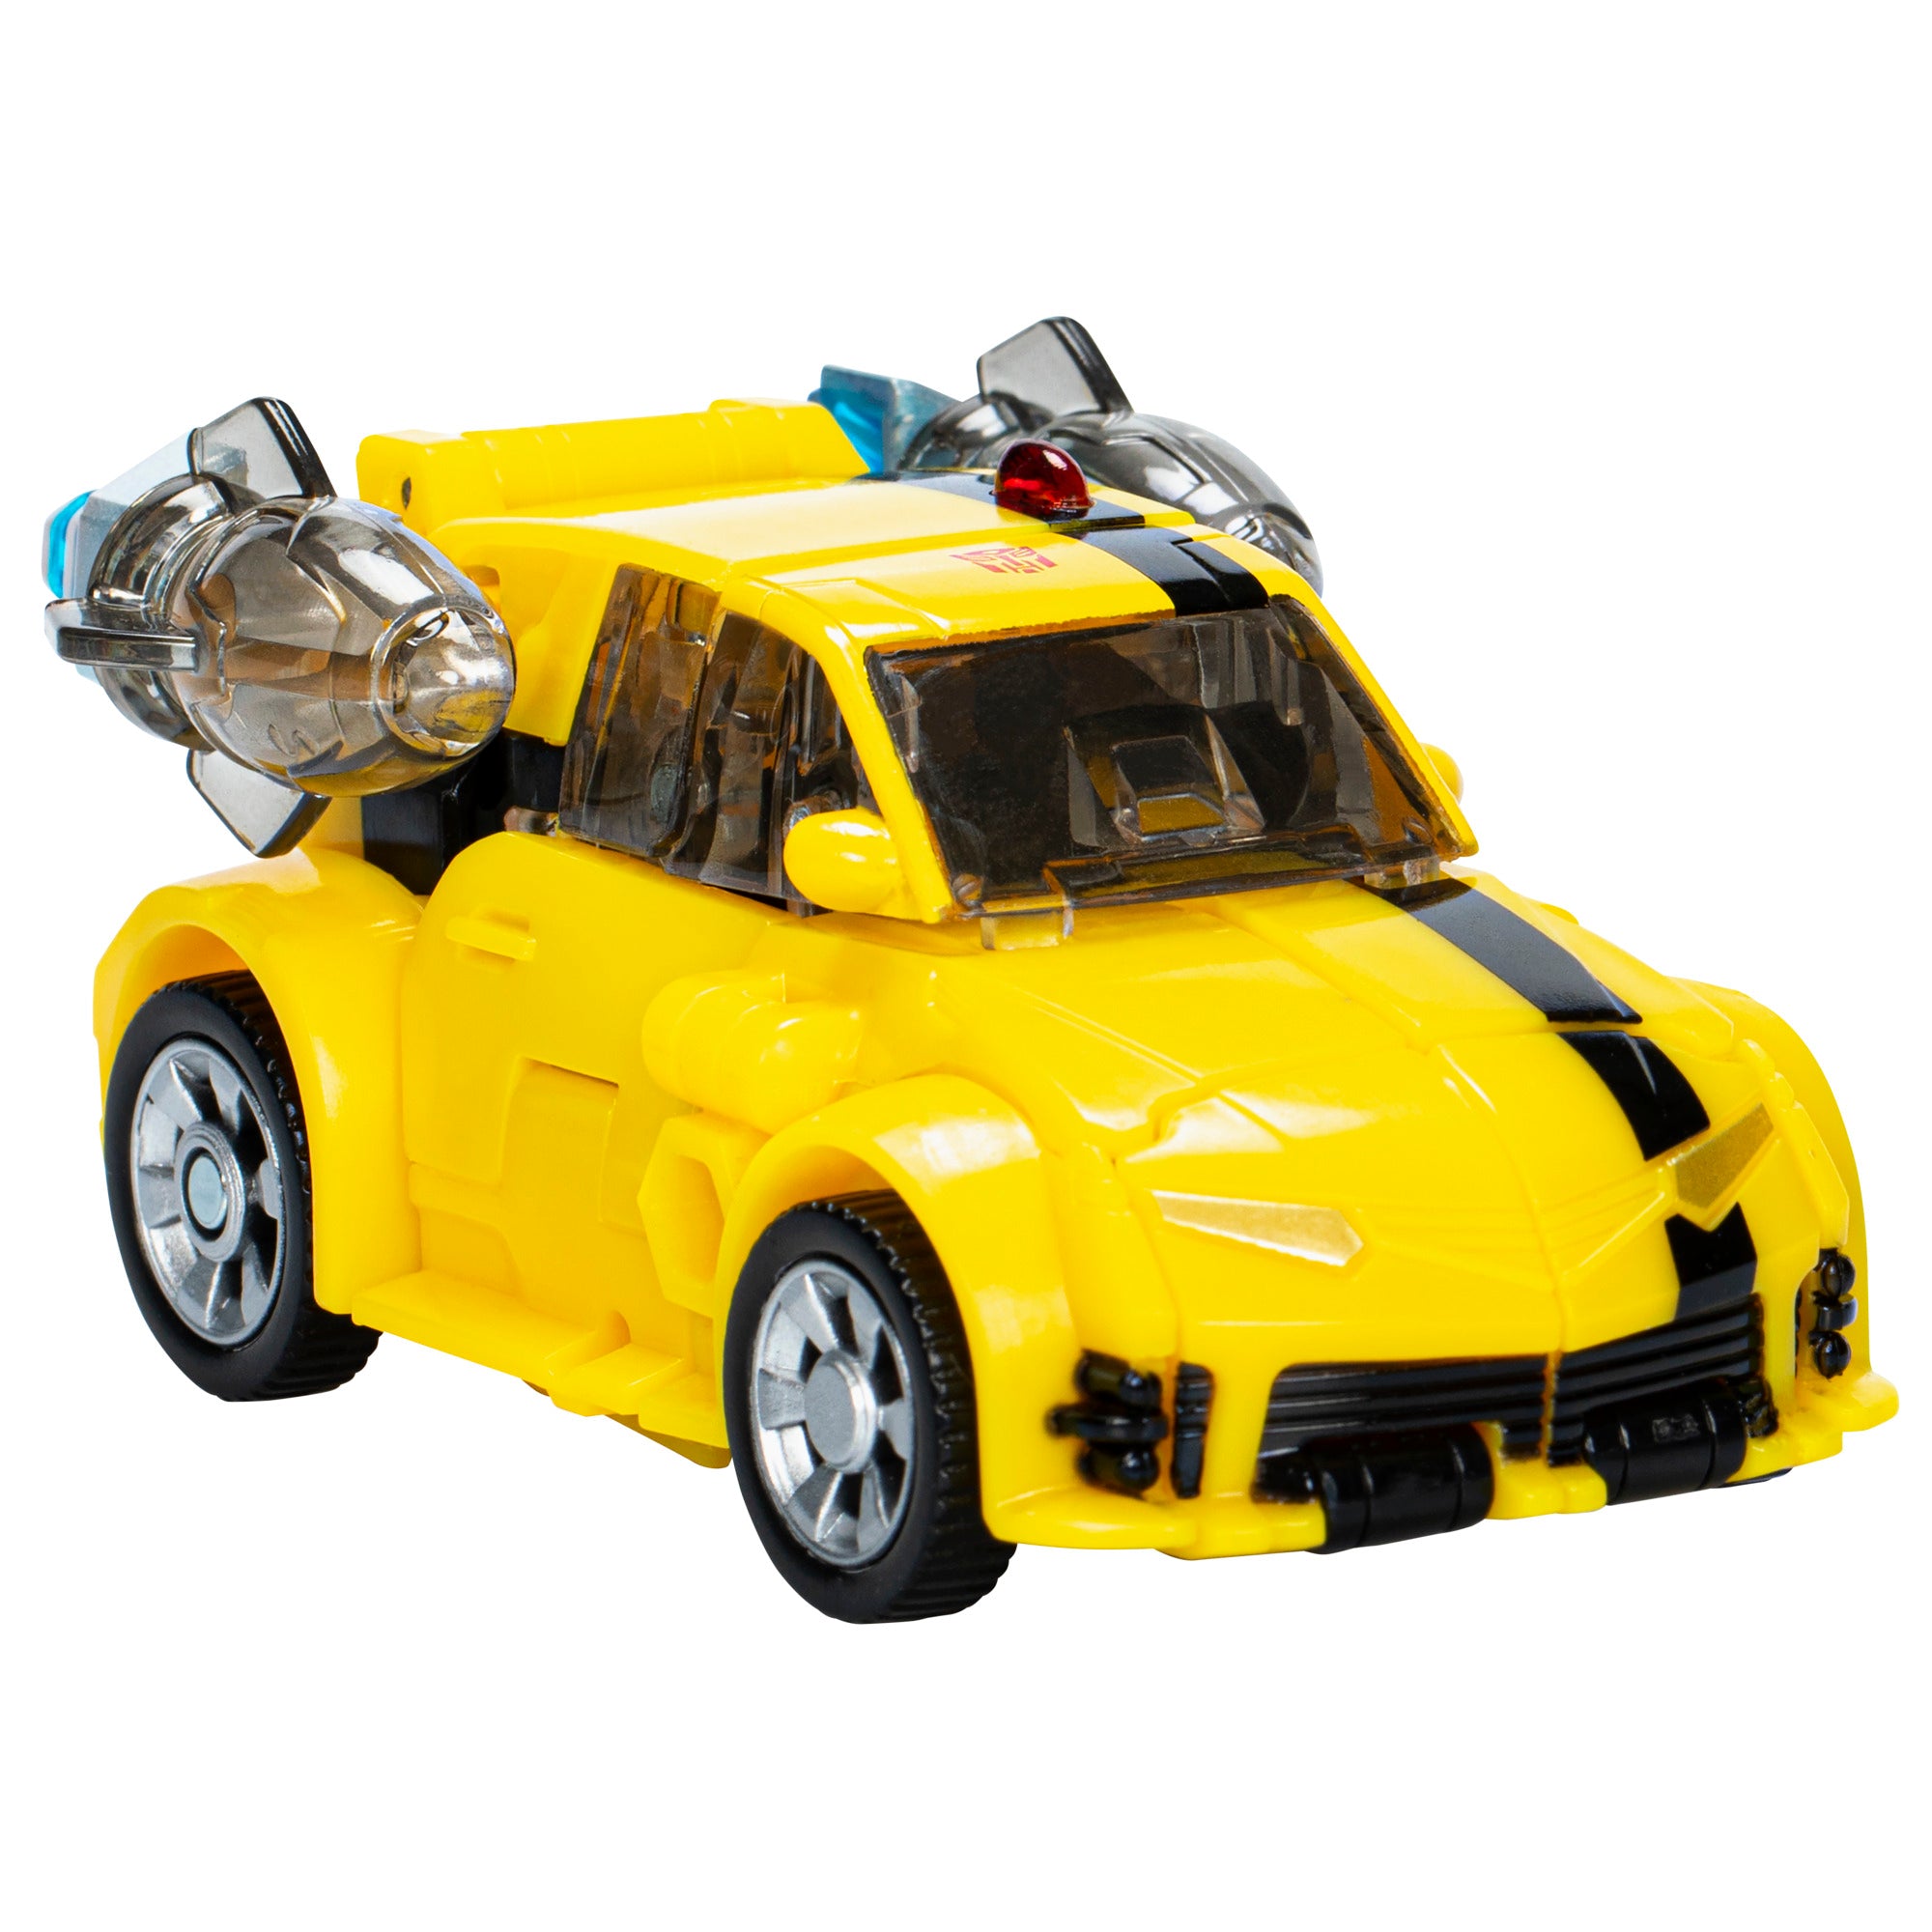 Transformers Generations Legacy United Series: Bumblebee Deluxe Class